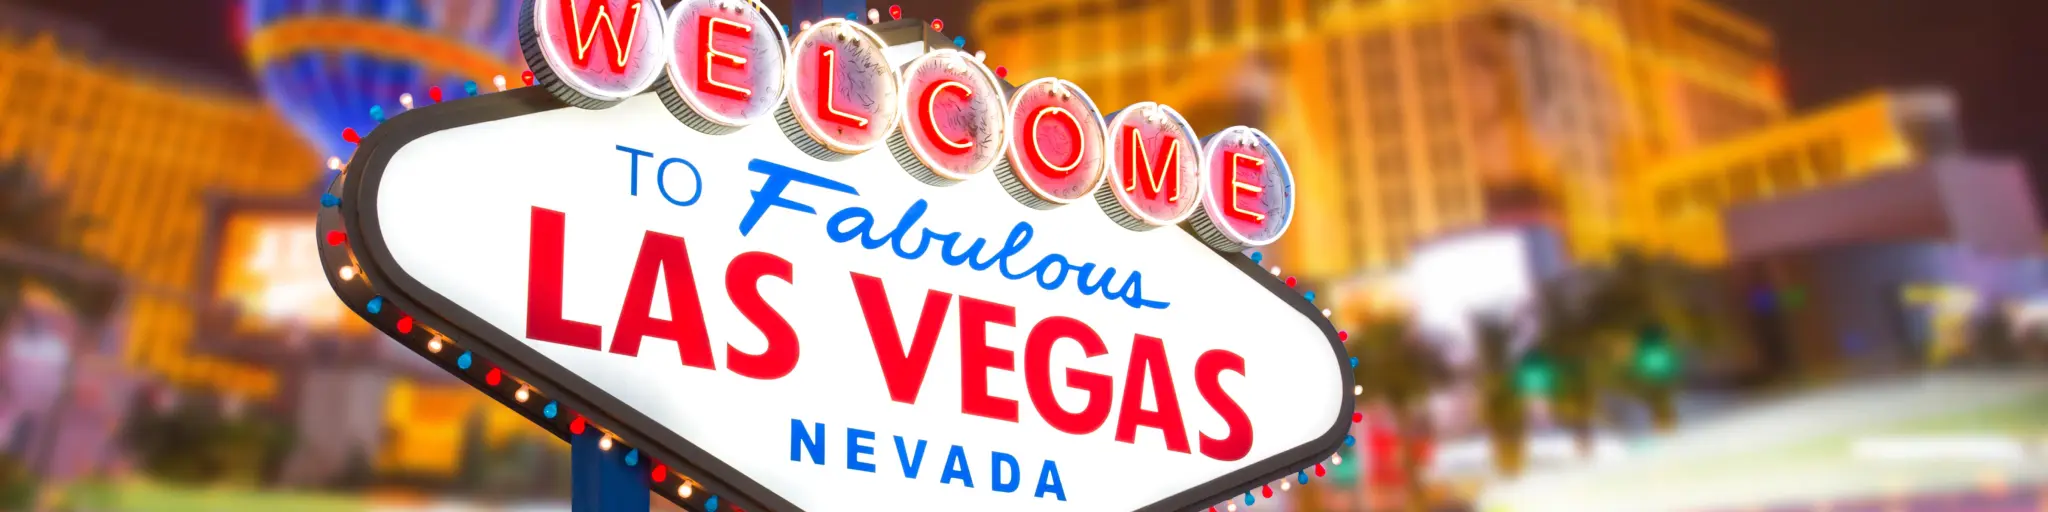 Neon-lit sign that reads "Welcome to Fabulous Las Vegas Nevada" with colorful lights of the hotels behind it